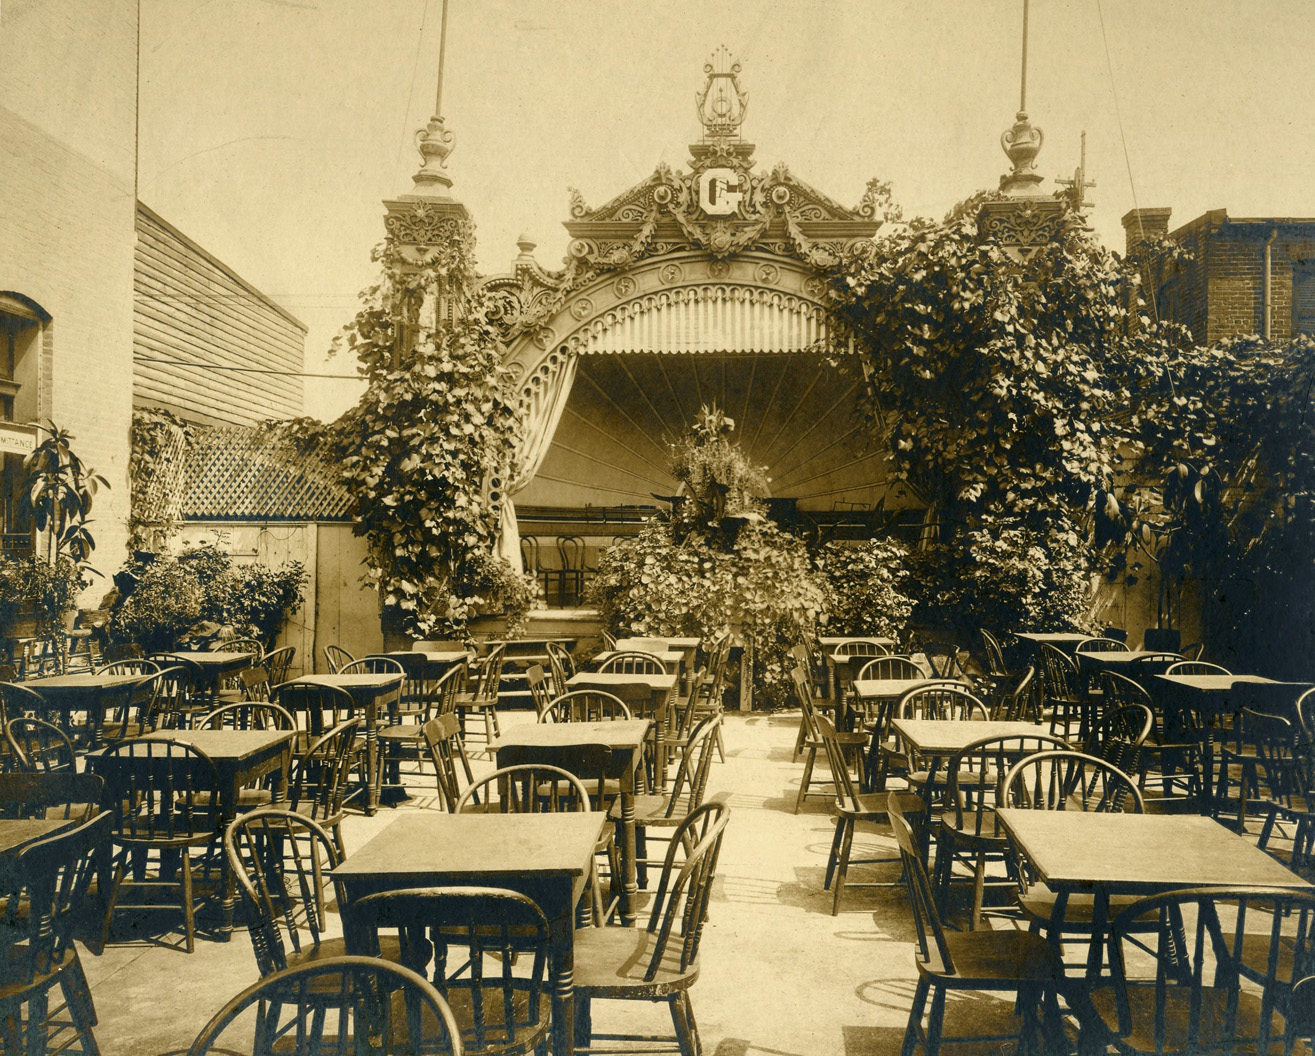 Rooftop garden of Fred Geyer's beer garden after it was purchased from George Kozel. 1827 14th St. NW, Washington D.C. probably about 1904-1908. View full size.